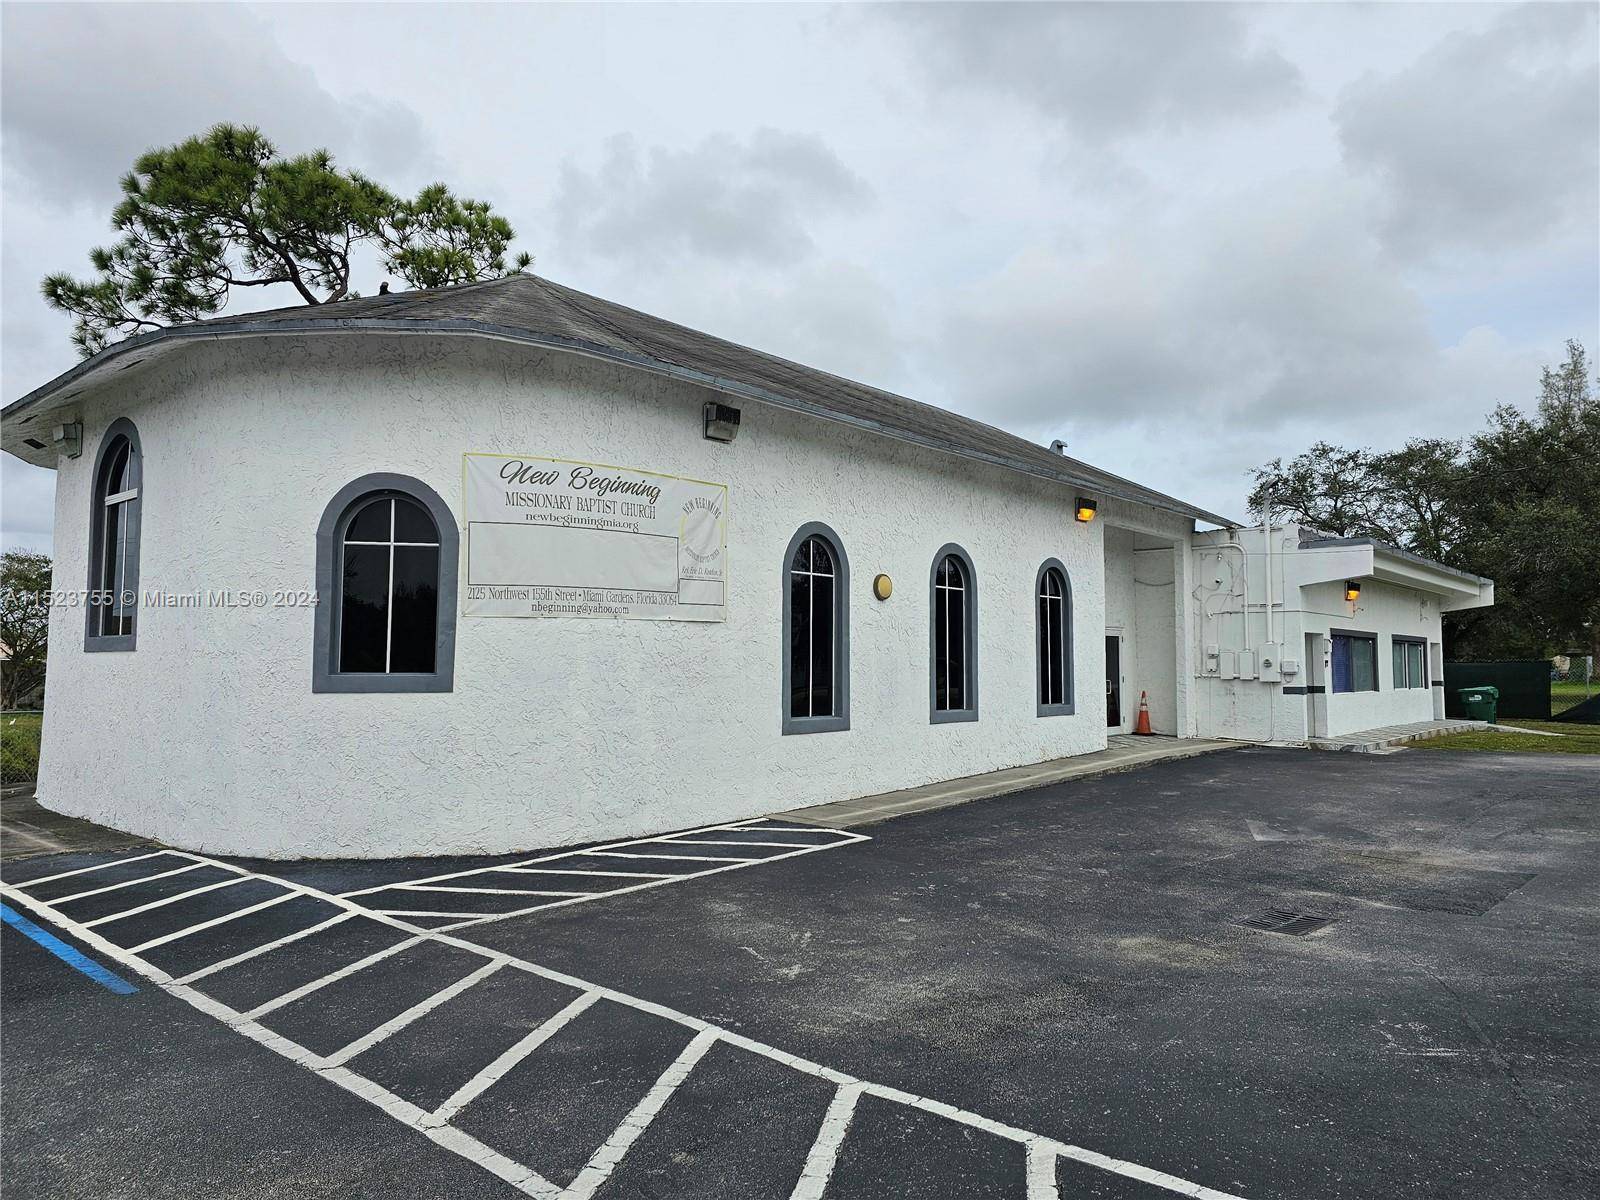 Embrace a unique opportunity with this 3, 546 sqft church on a 17, 945 sqft commercial lot zoned 6500.